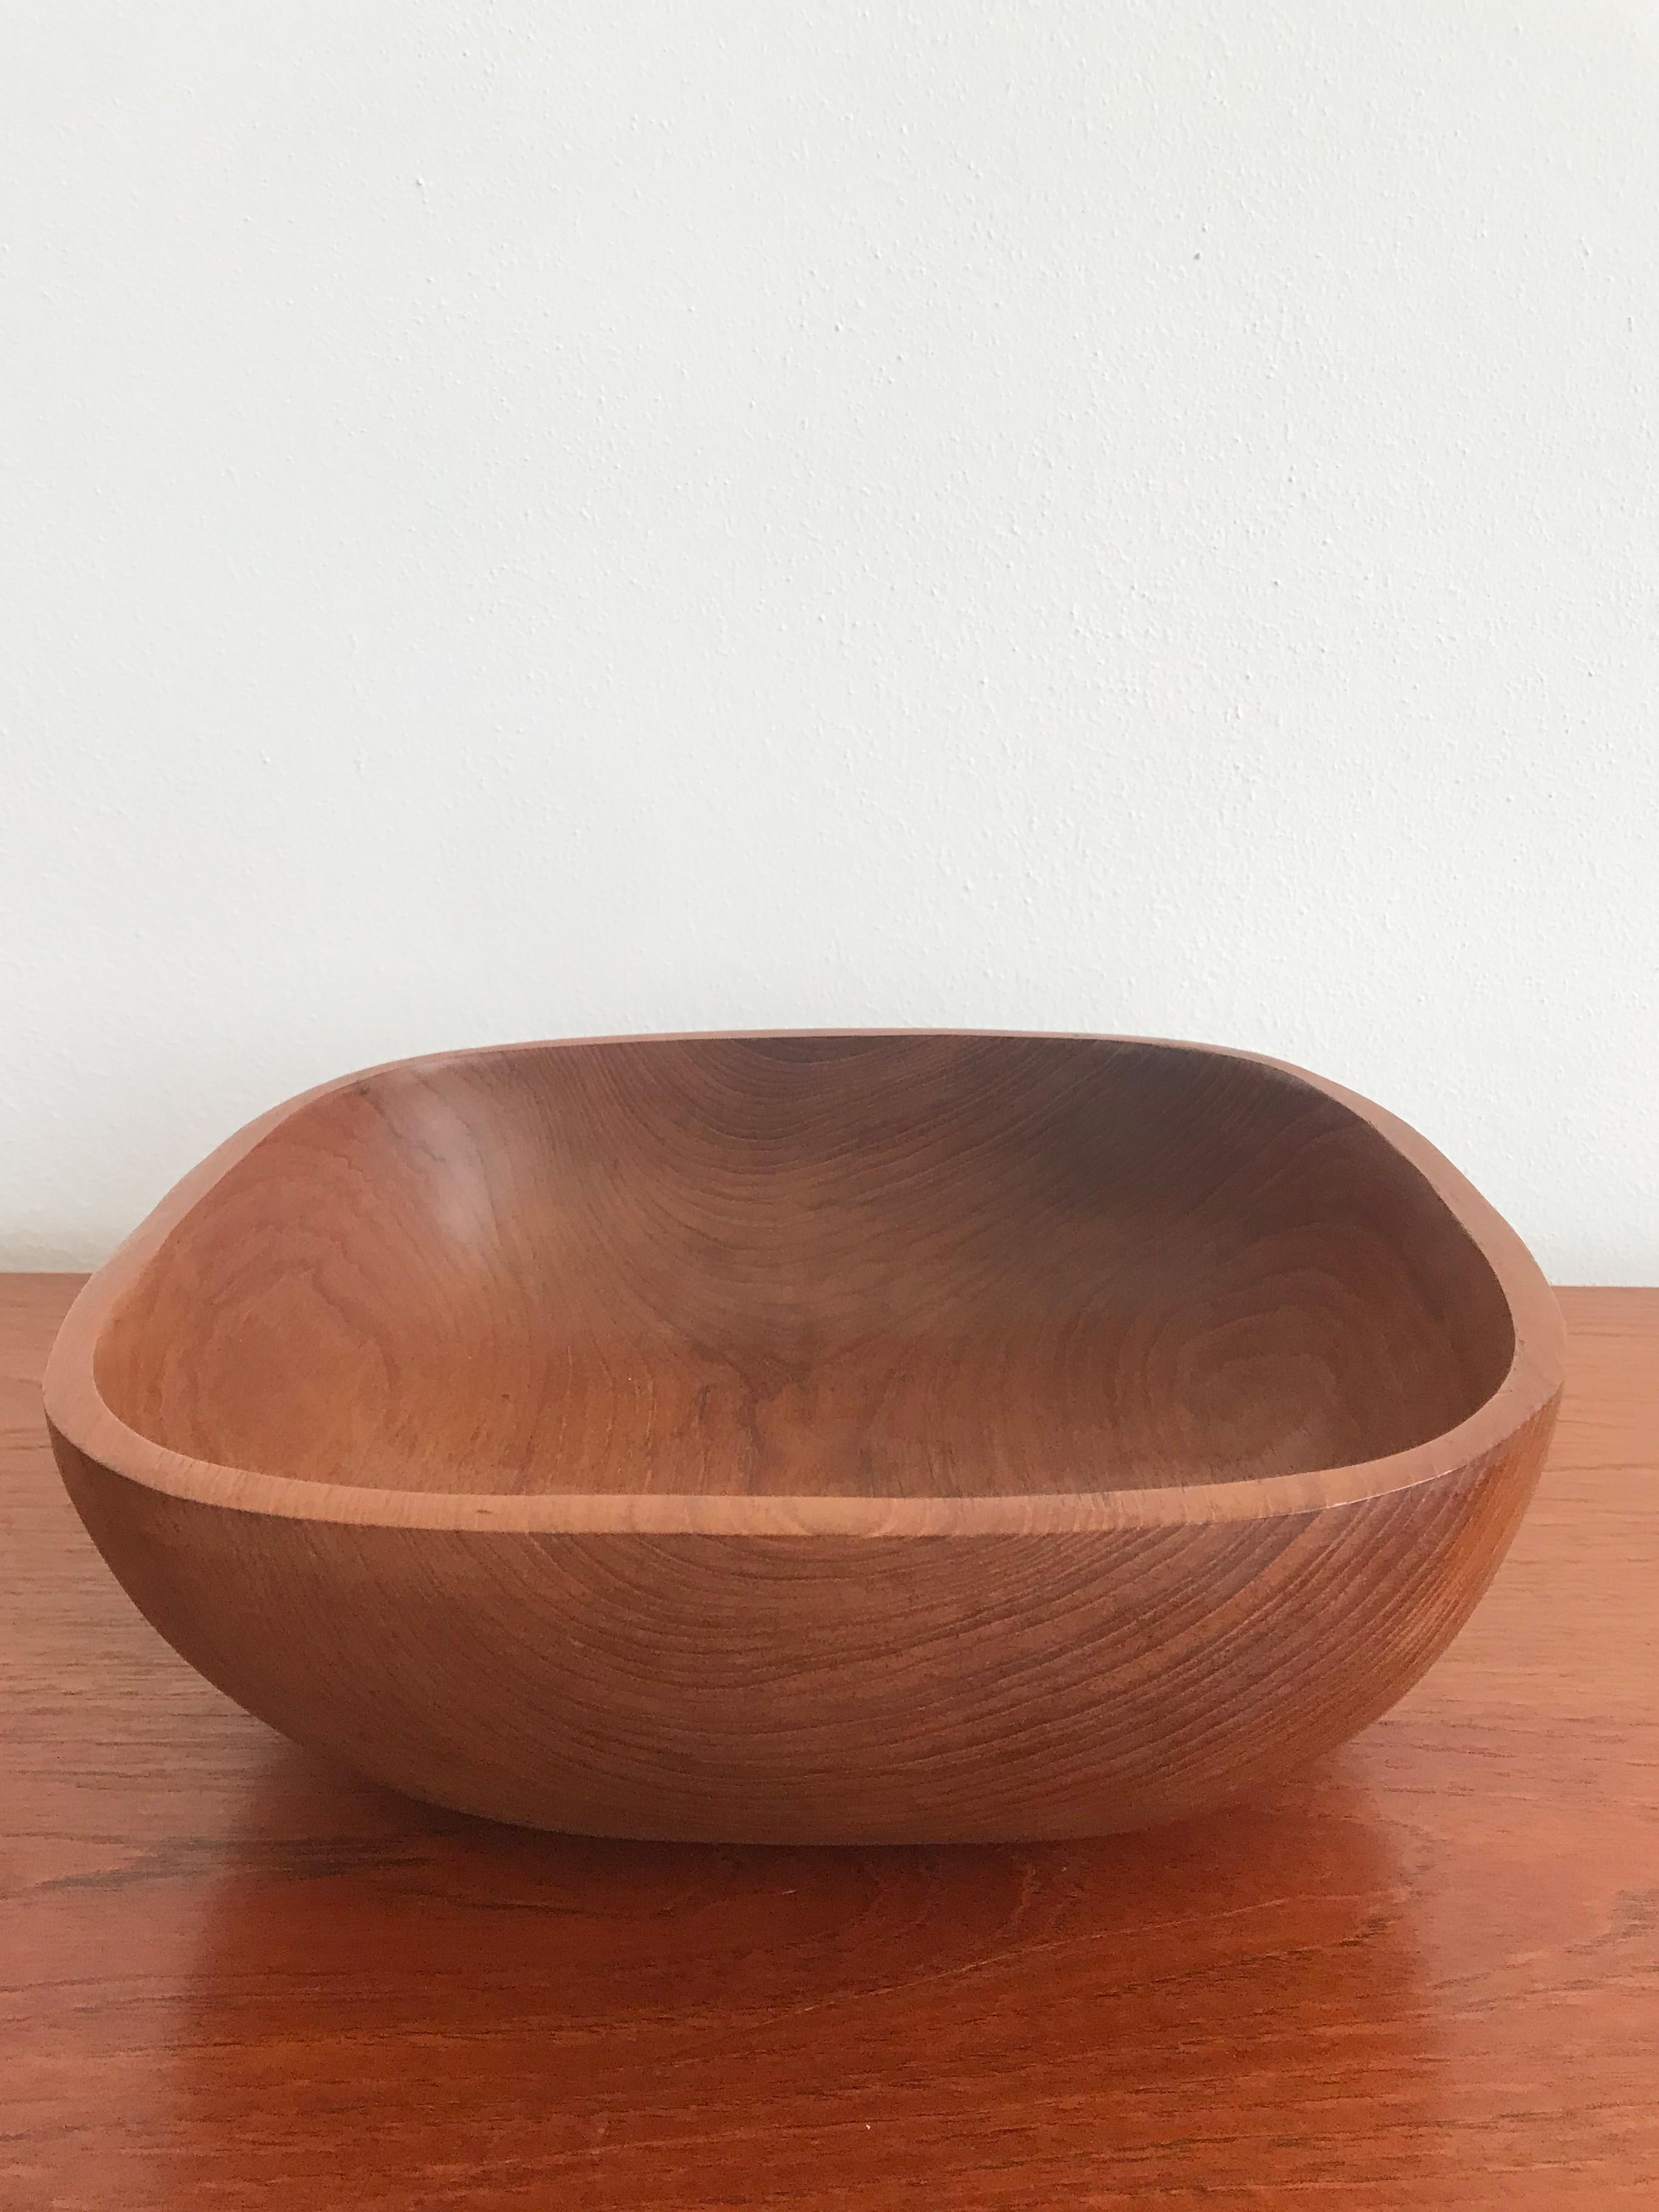 Midcentury moderrn design scandinavian teak wood bowl centerpiece, Denmark 1960s

Please note that the item is original of the period and this shows normal signs of age and use.